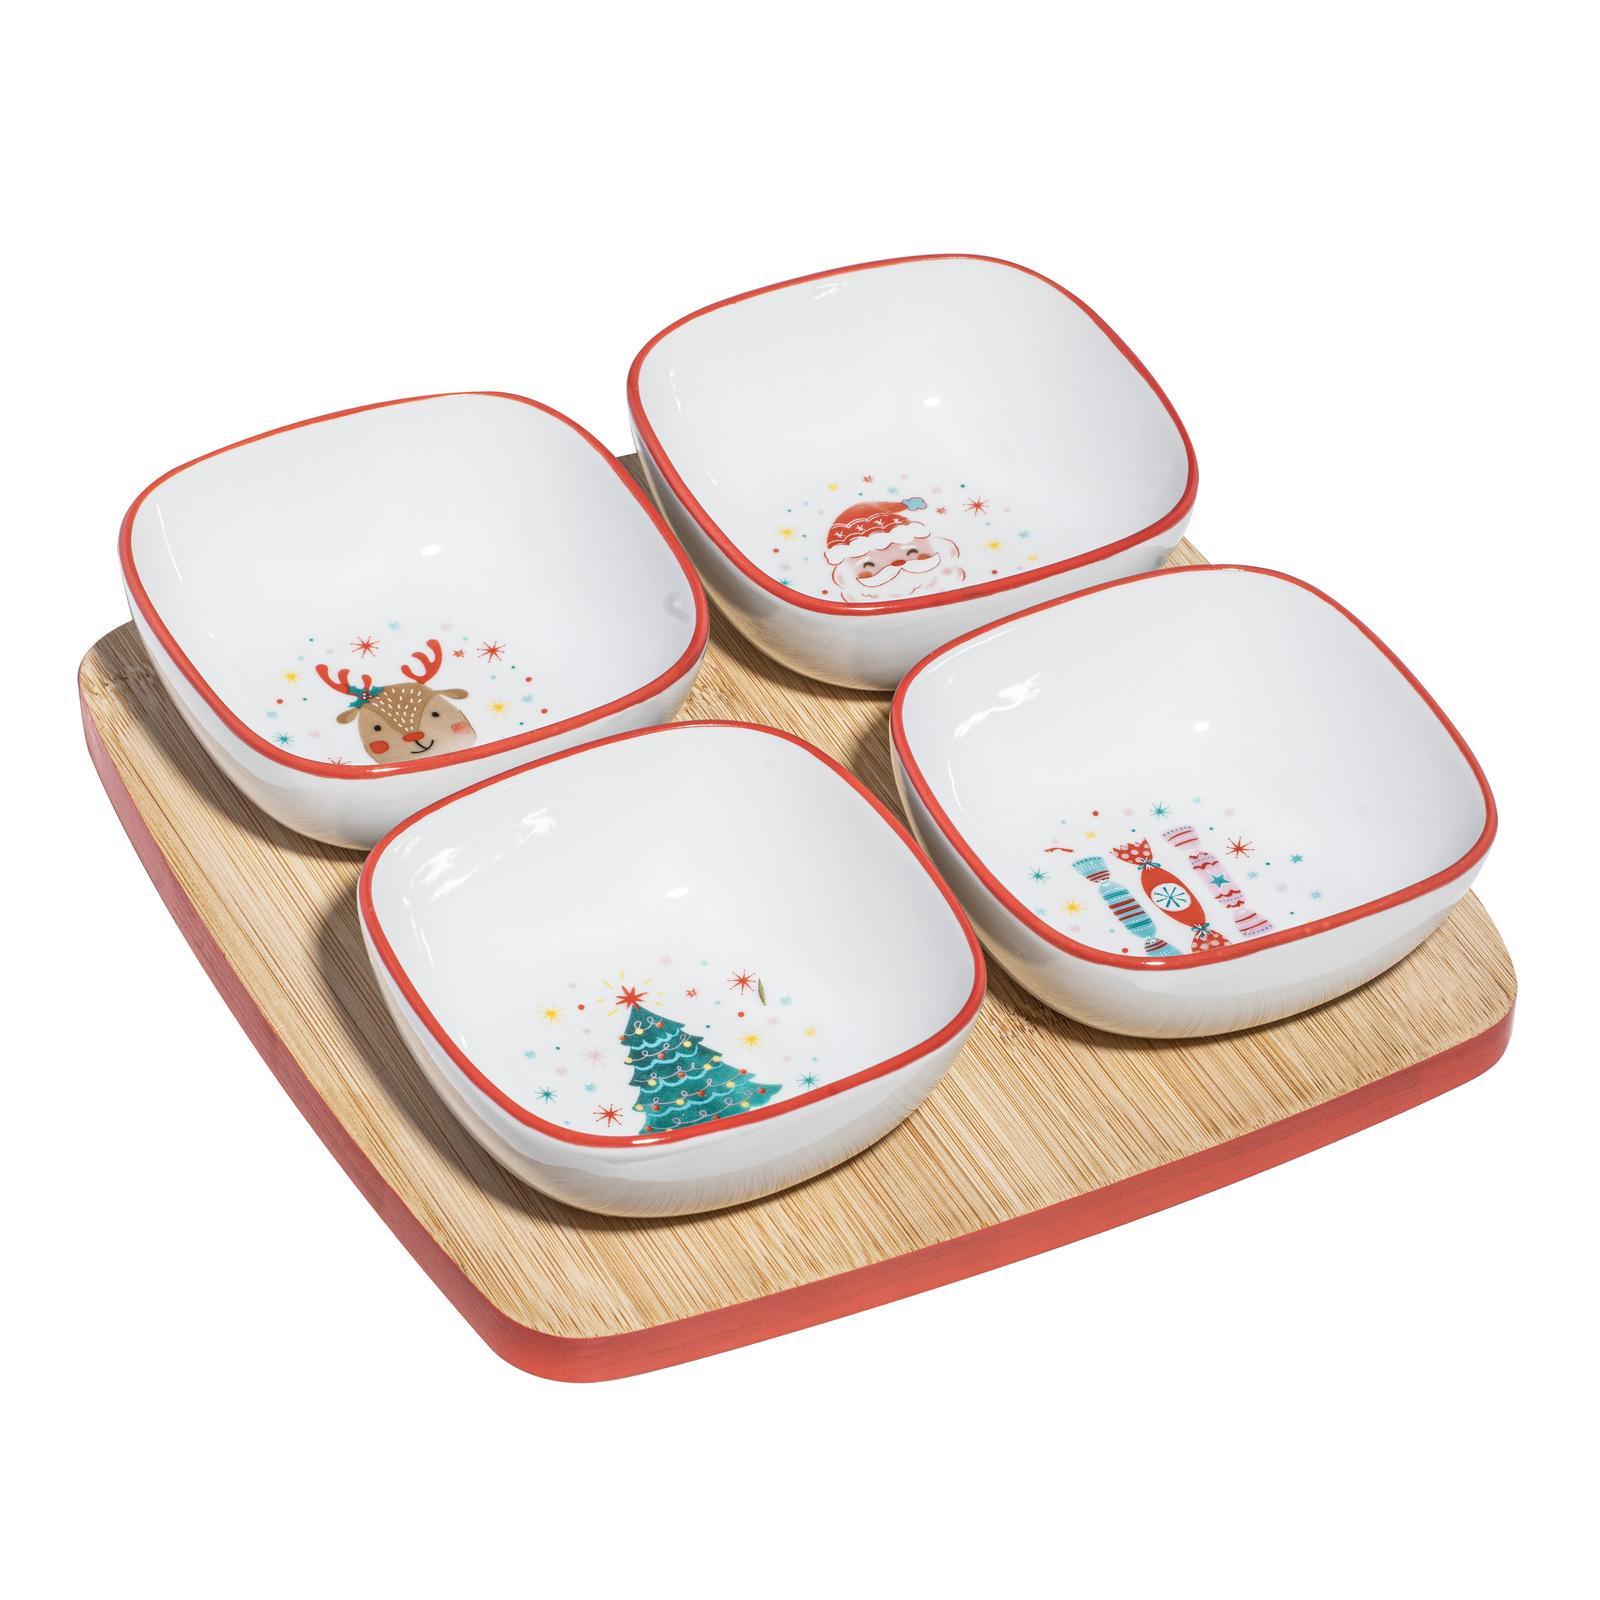 5pc Ladelle Candy Porcelain Bowl & Bamboo Tray Serving/Entertaining Set